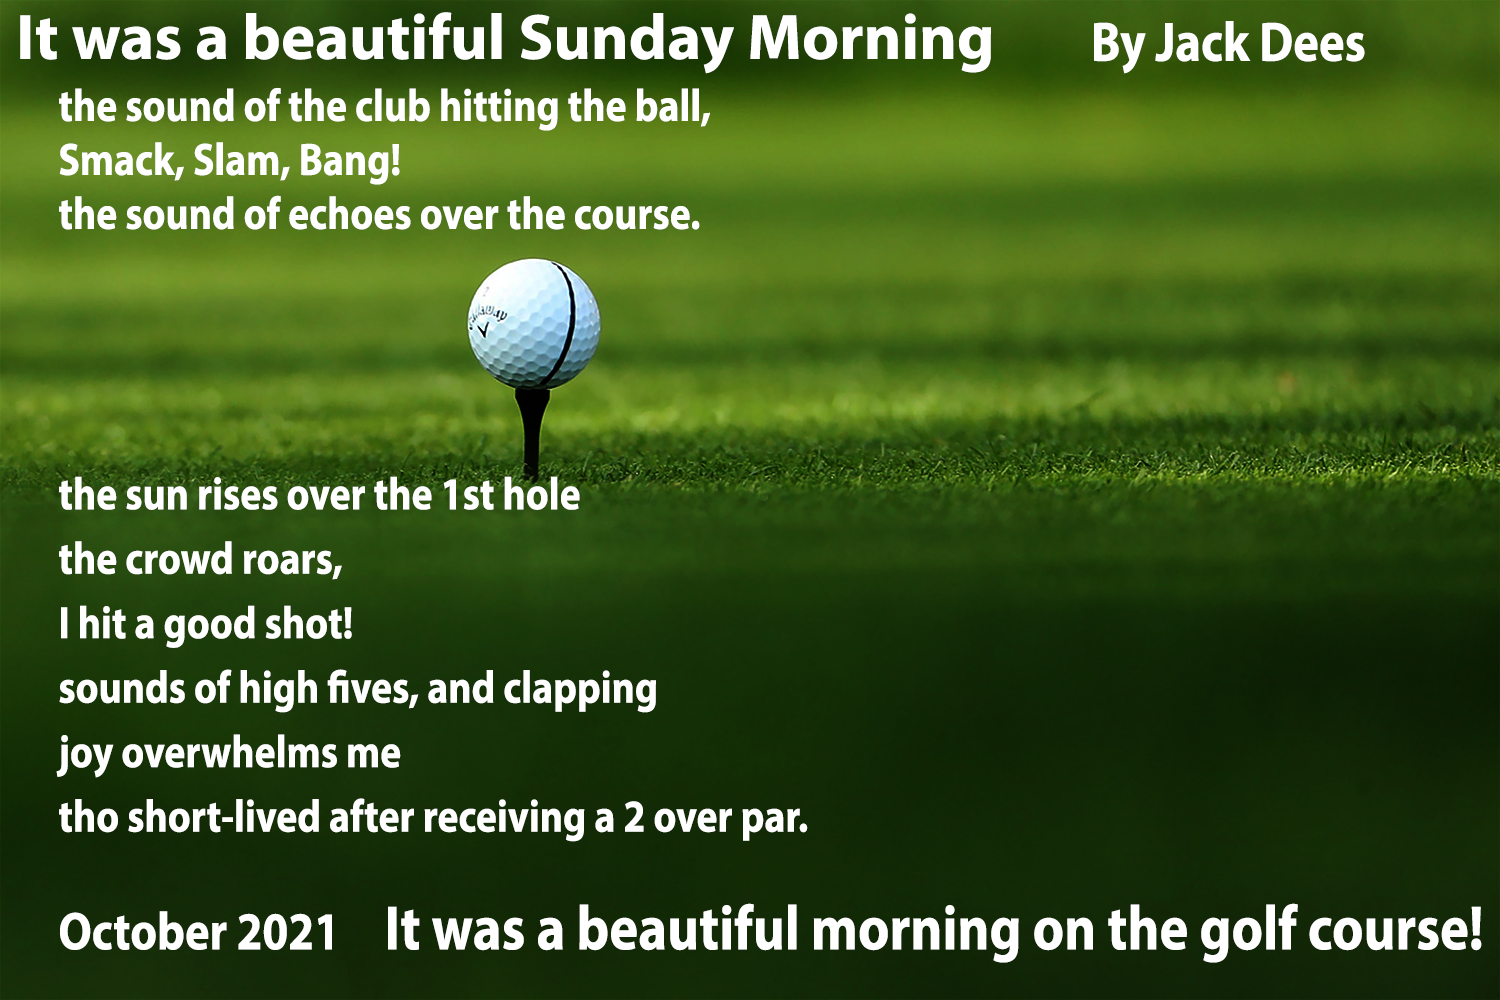 Poem by Jack Dees It was a beautiful Sunday Morning